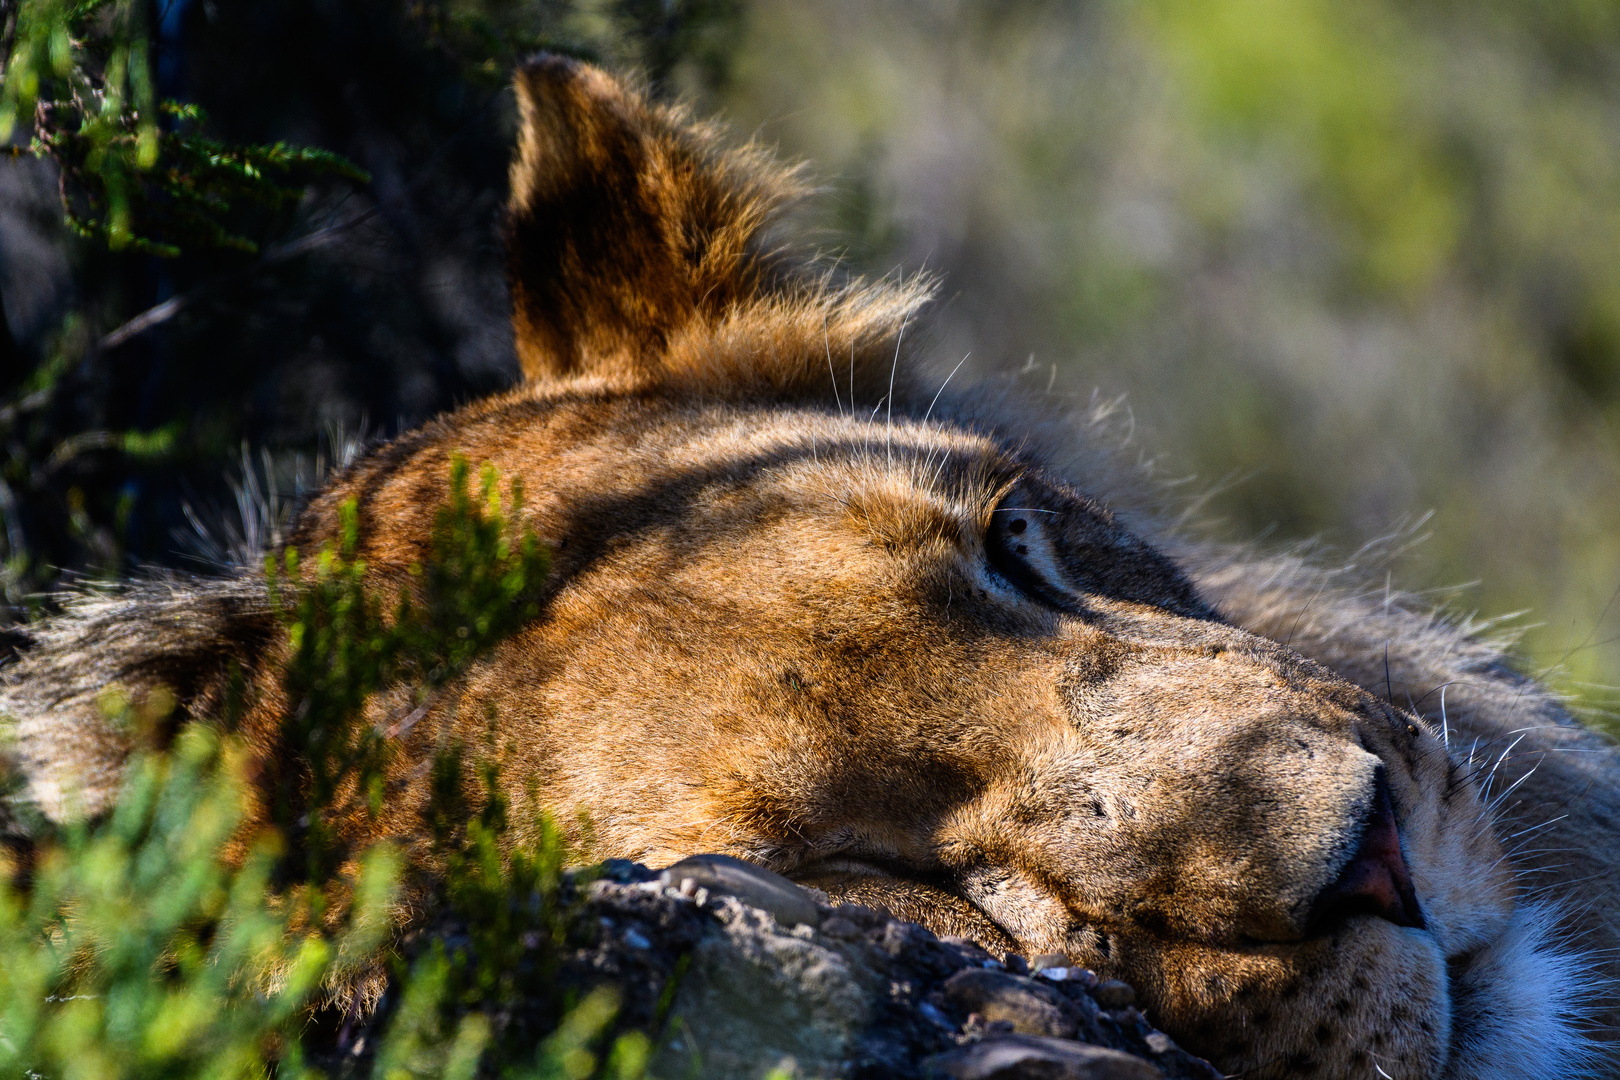 The Lion sleeps to-day